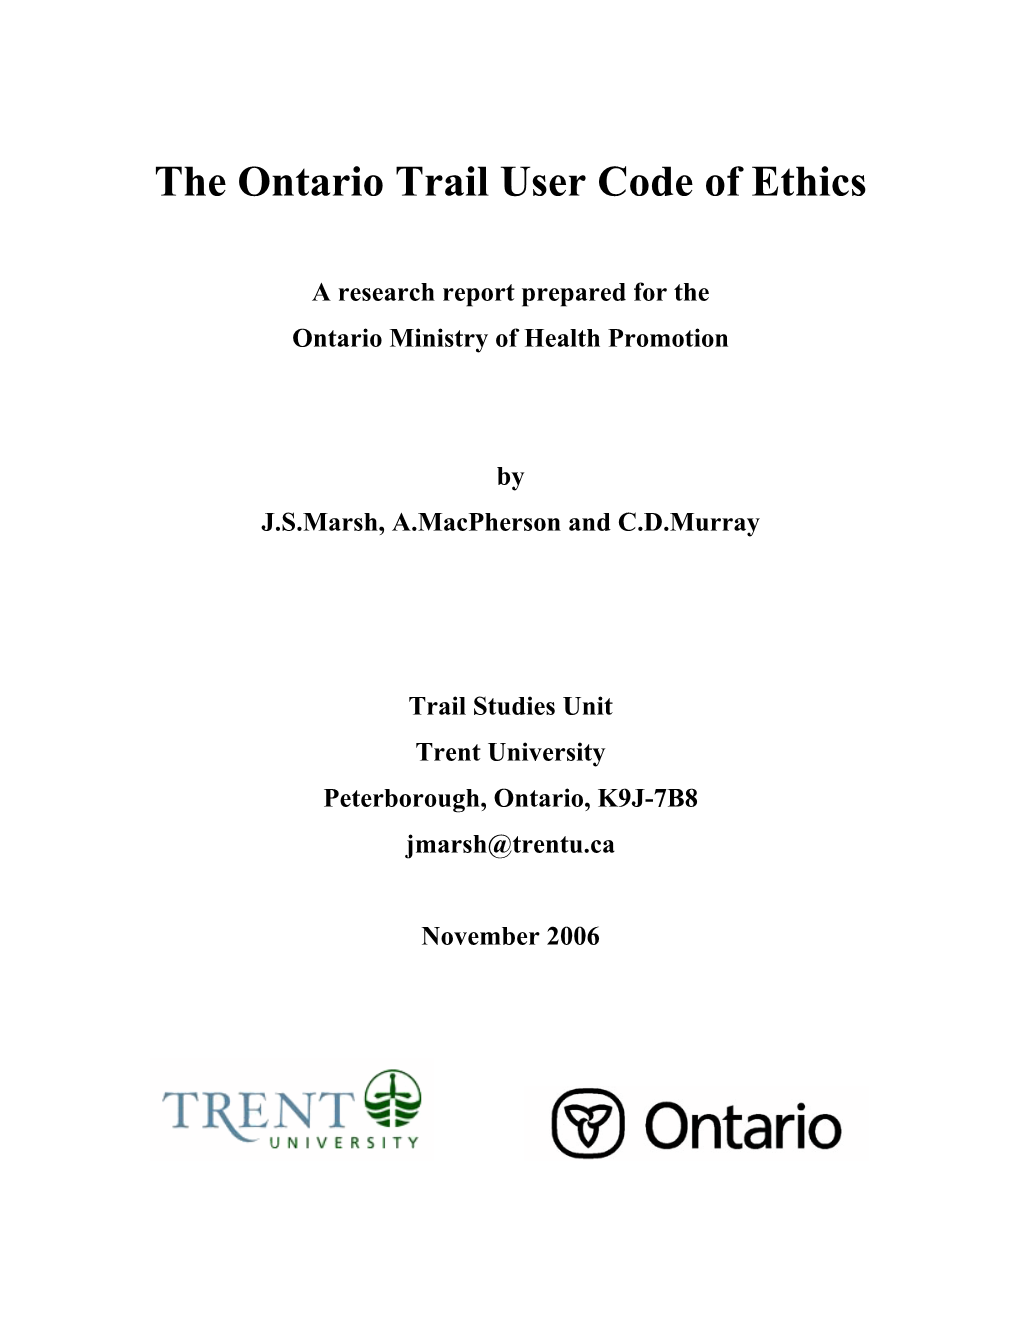 The Ontario Trail User Code of Ethics